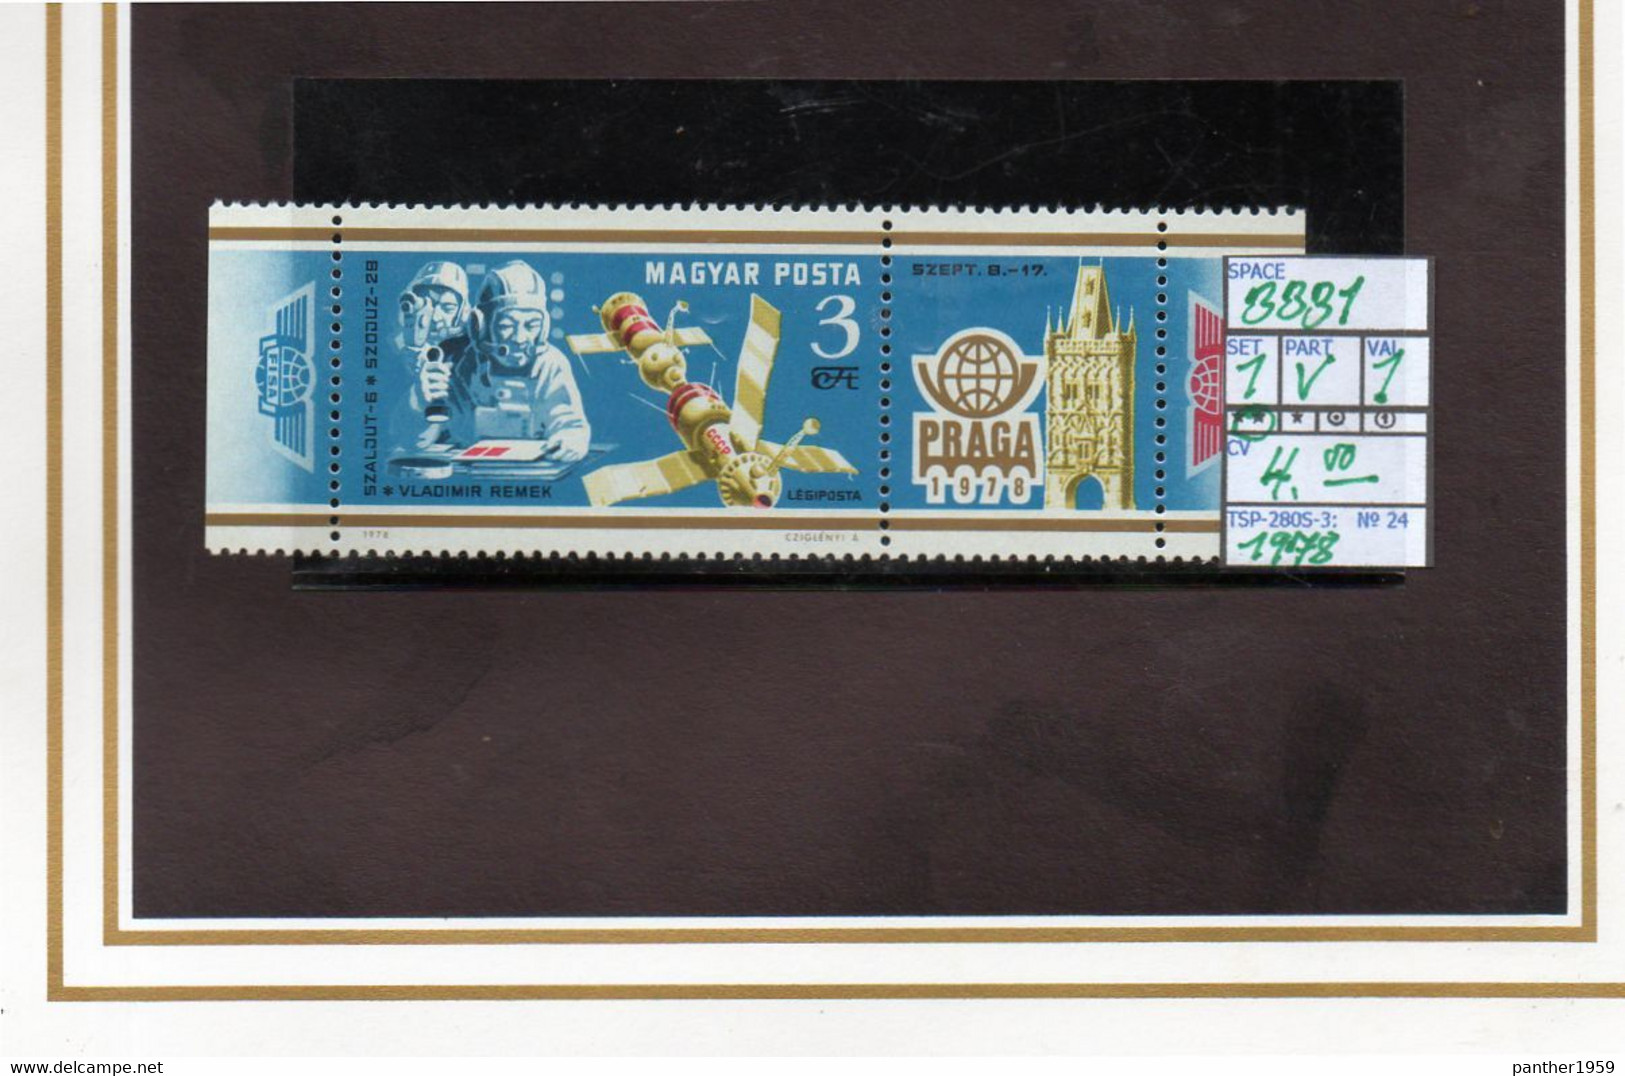 THEMATICS:EUROPE#HUNGARY#USSR SPACEPROGRAM# COMPLETE SET# MNH**# (TSP-280S-3 (24) - Collections